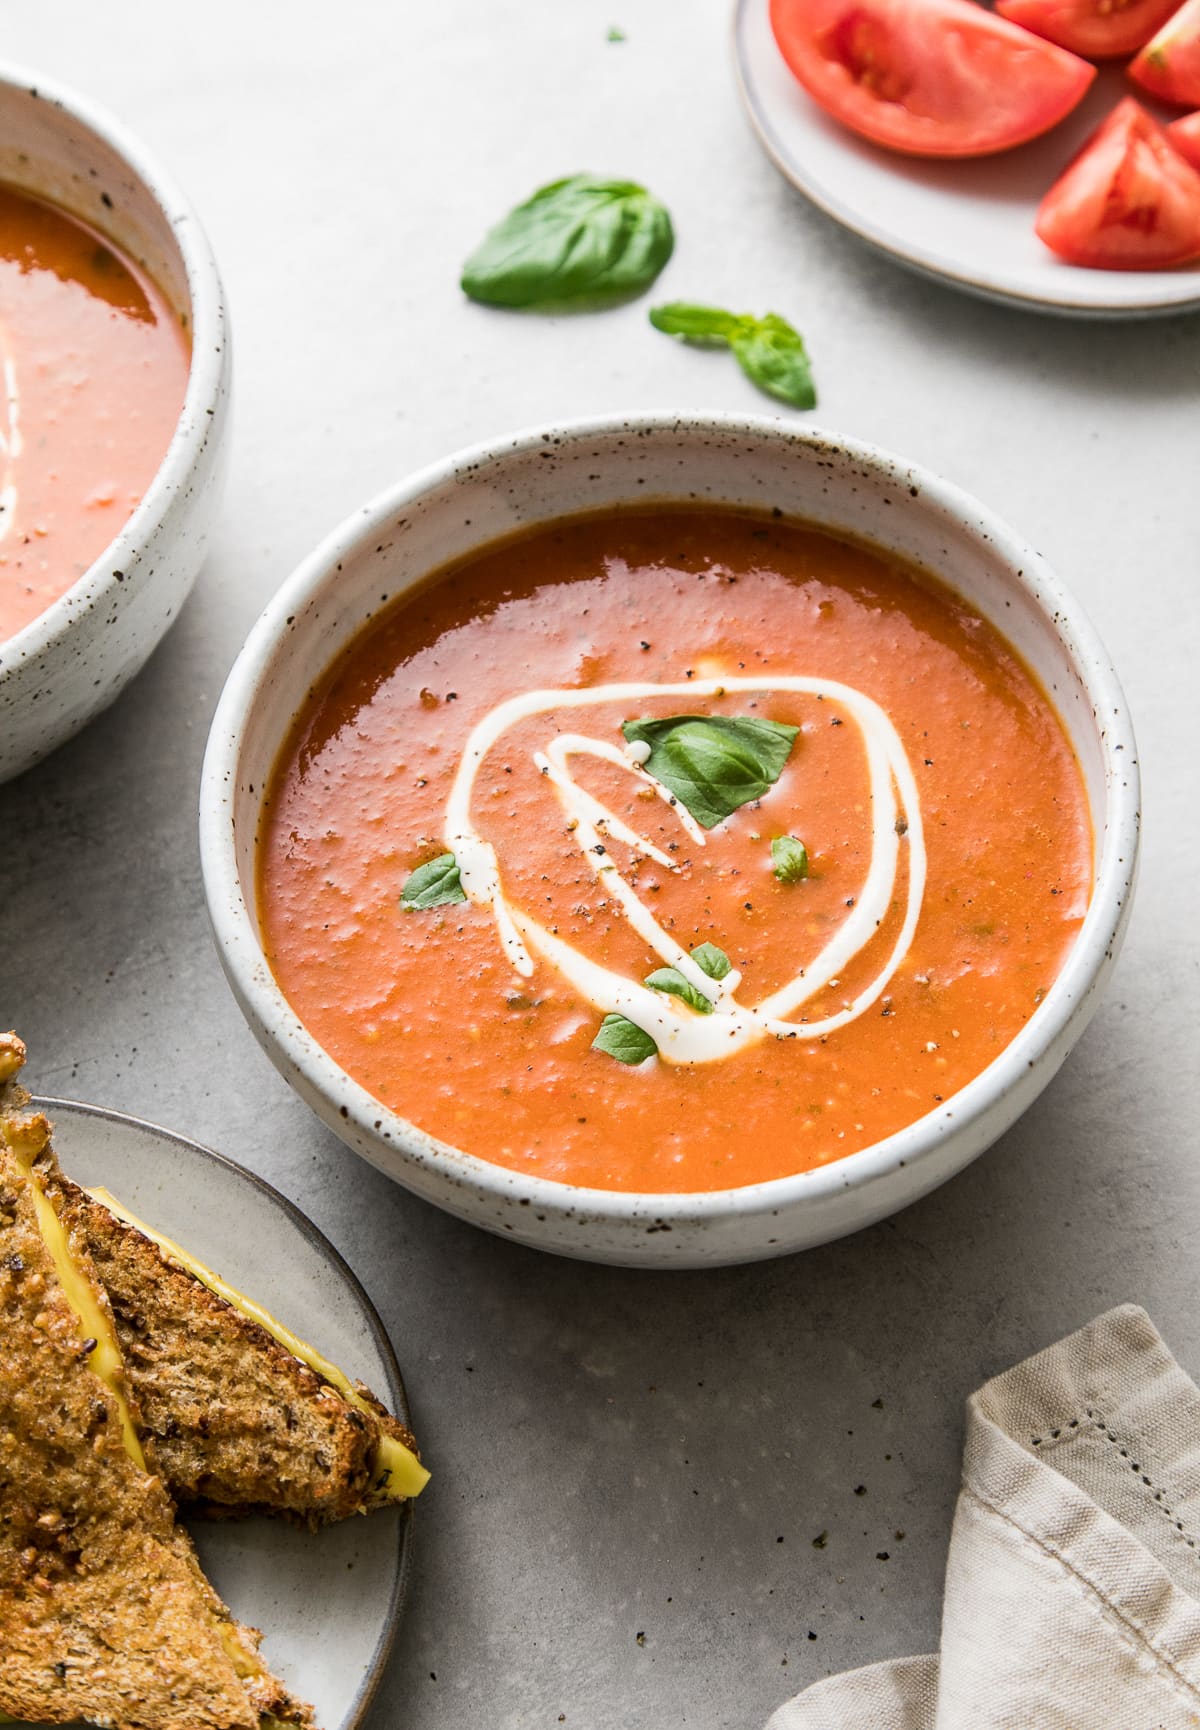 side angle view of bowl with serving of tomato basil soup and items surrounding.